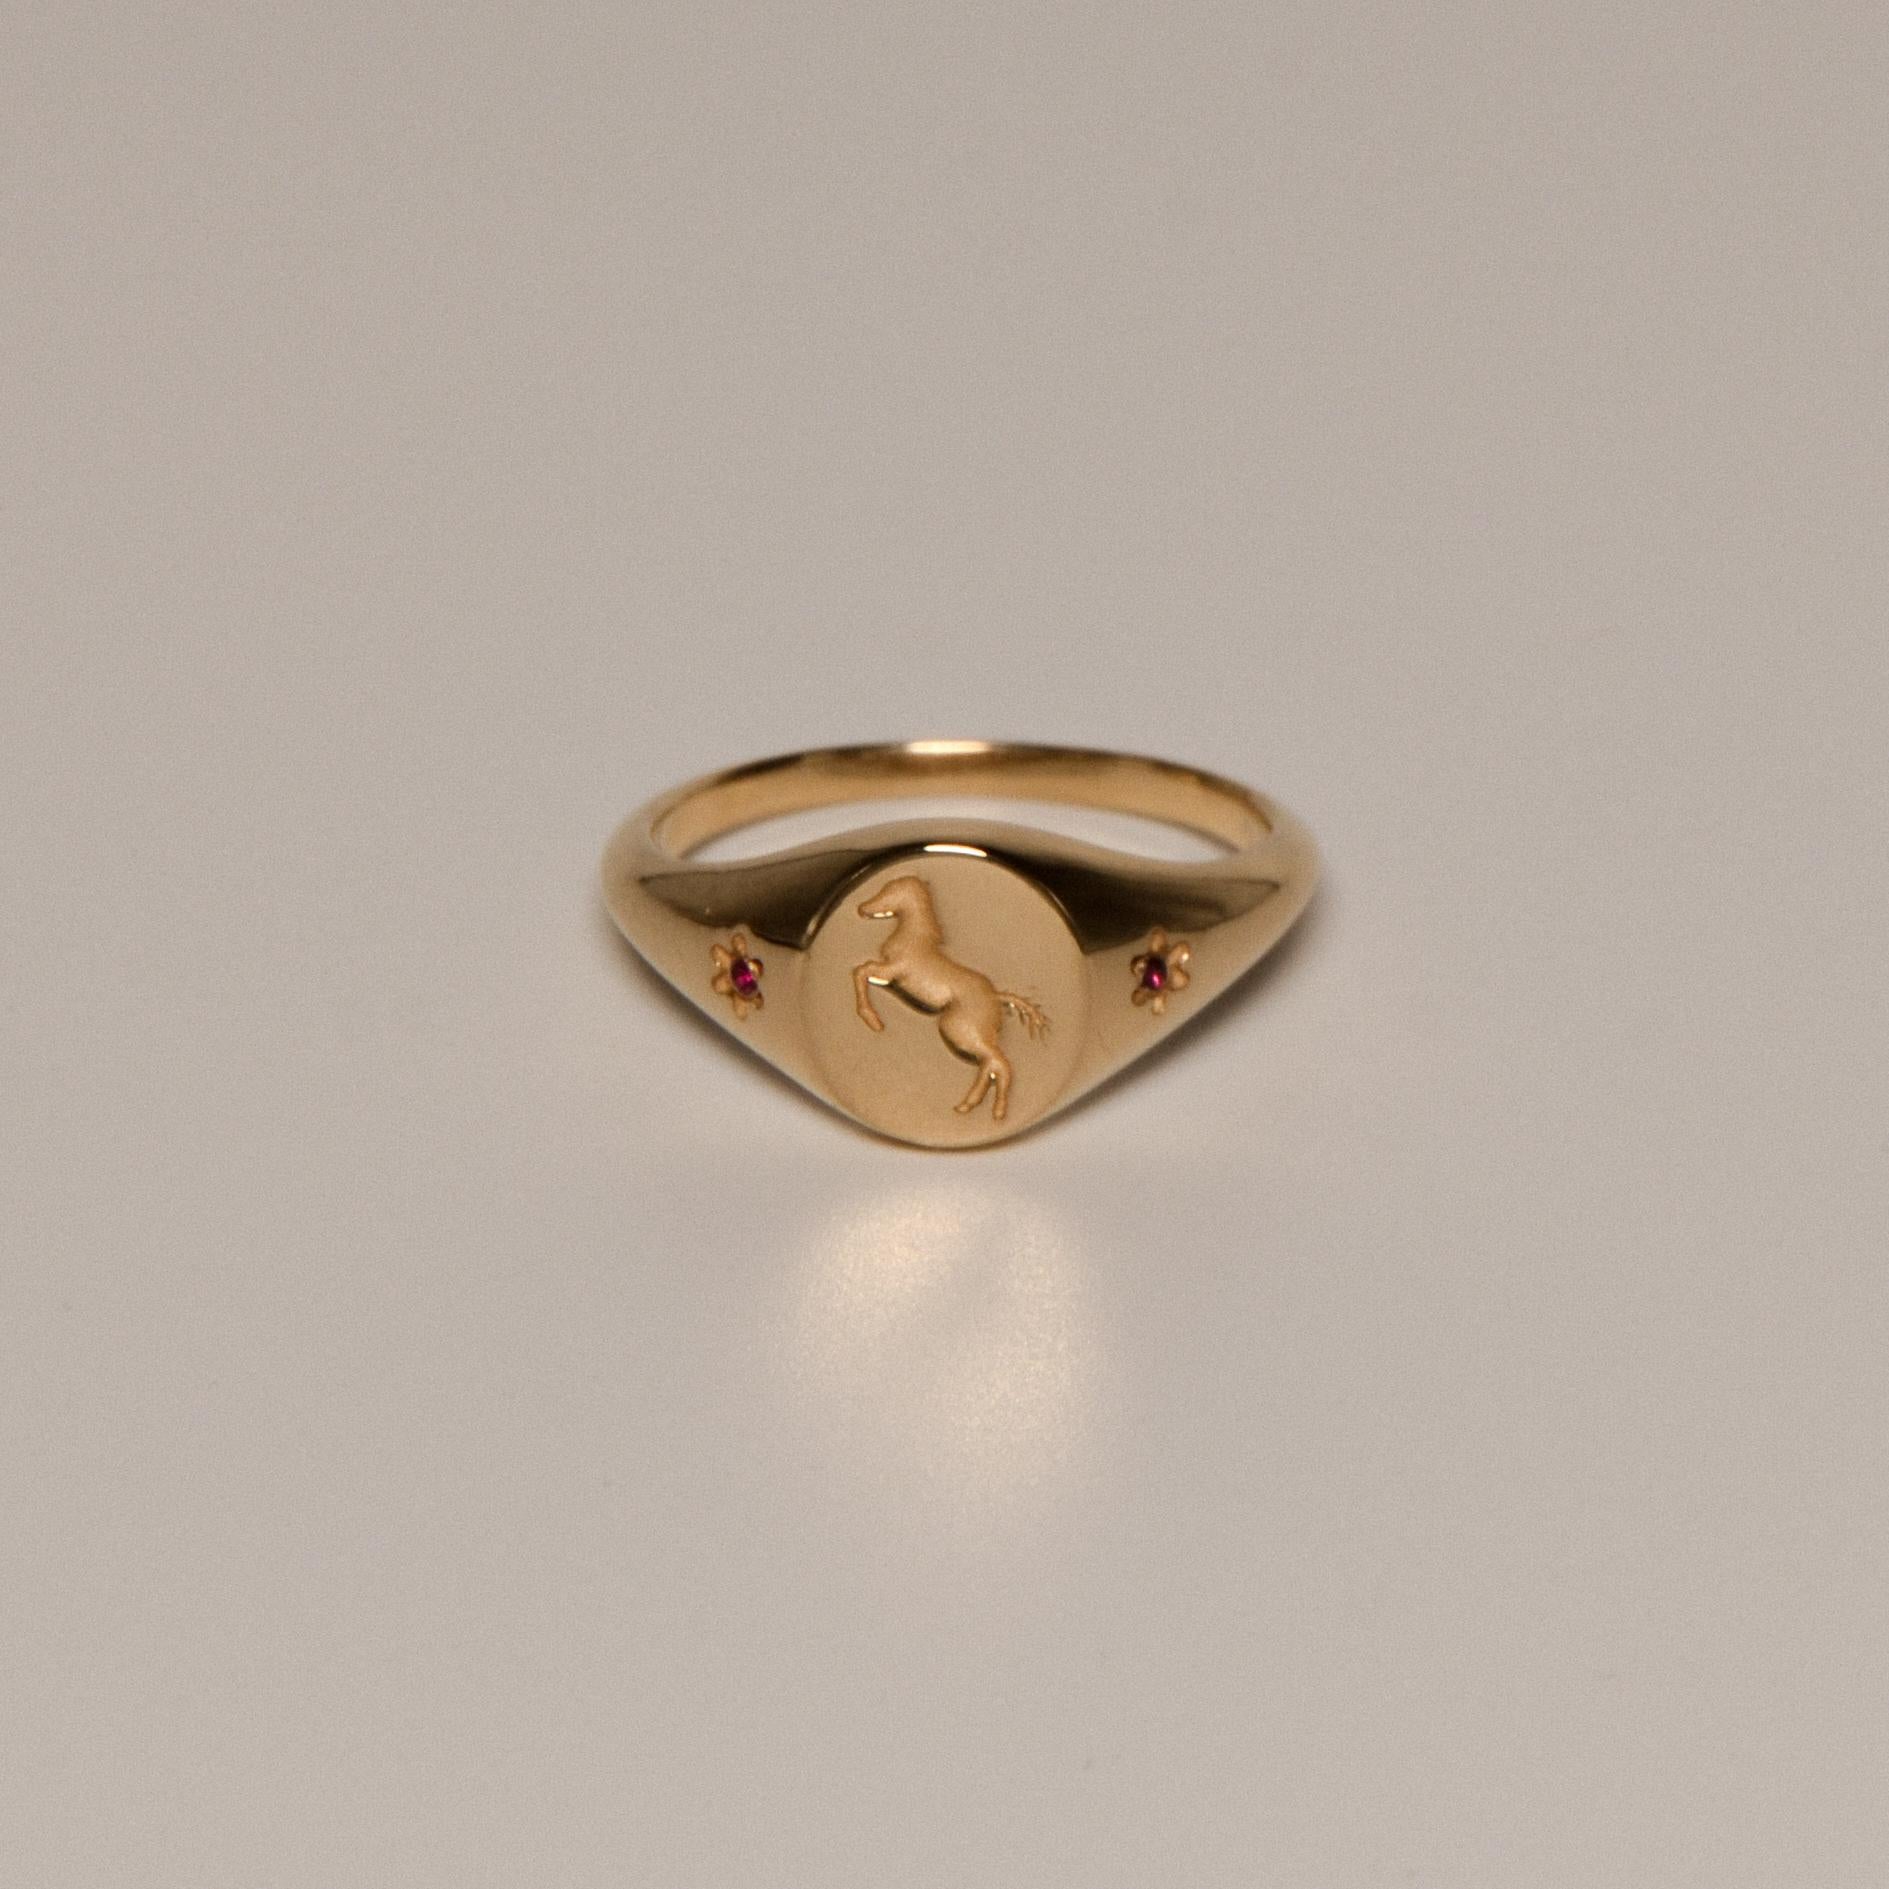 For Sale:  Ruth Nyc x Tea Leigh Pony Signet Ring, 14k Yellow Gold with Rubies 2